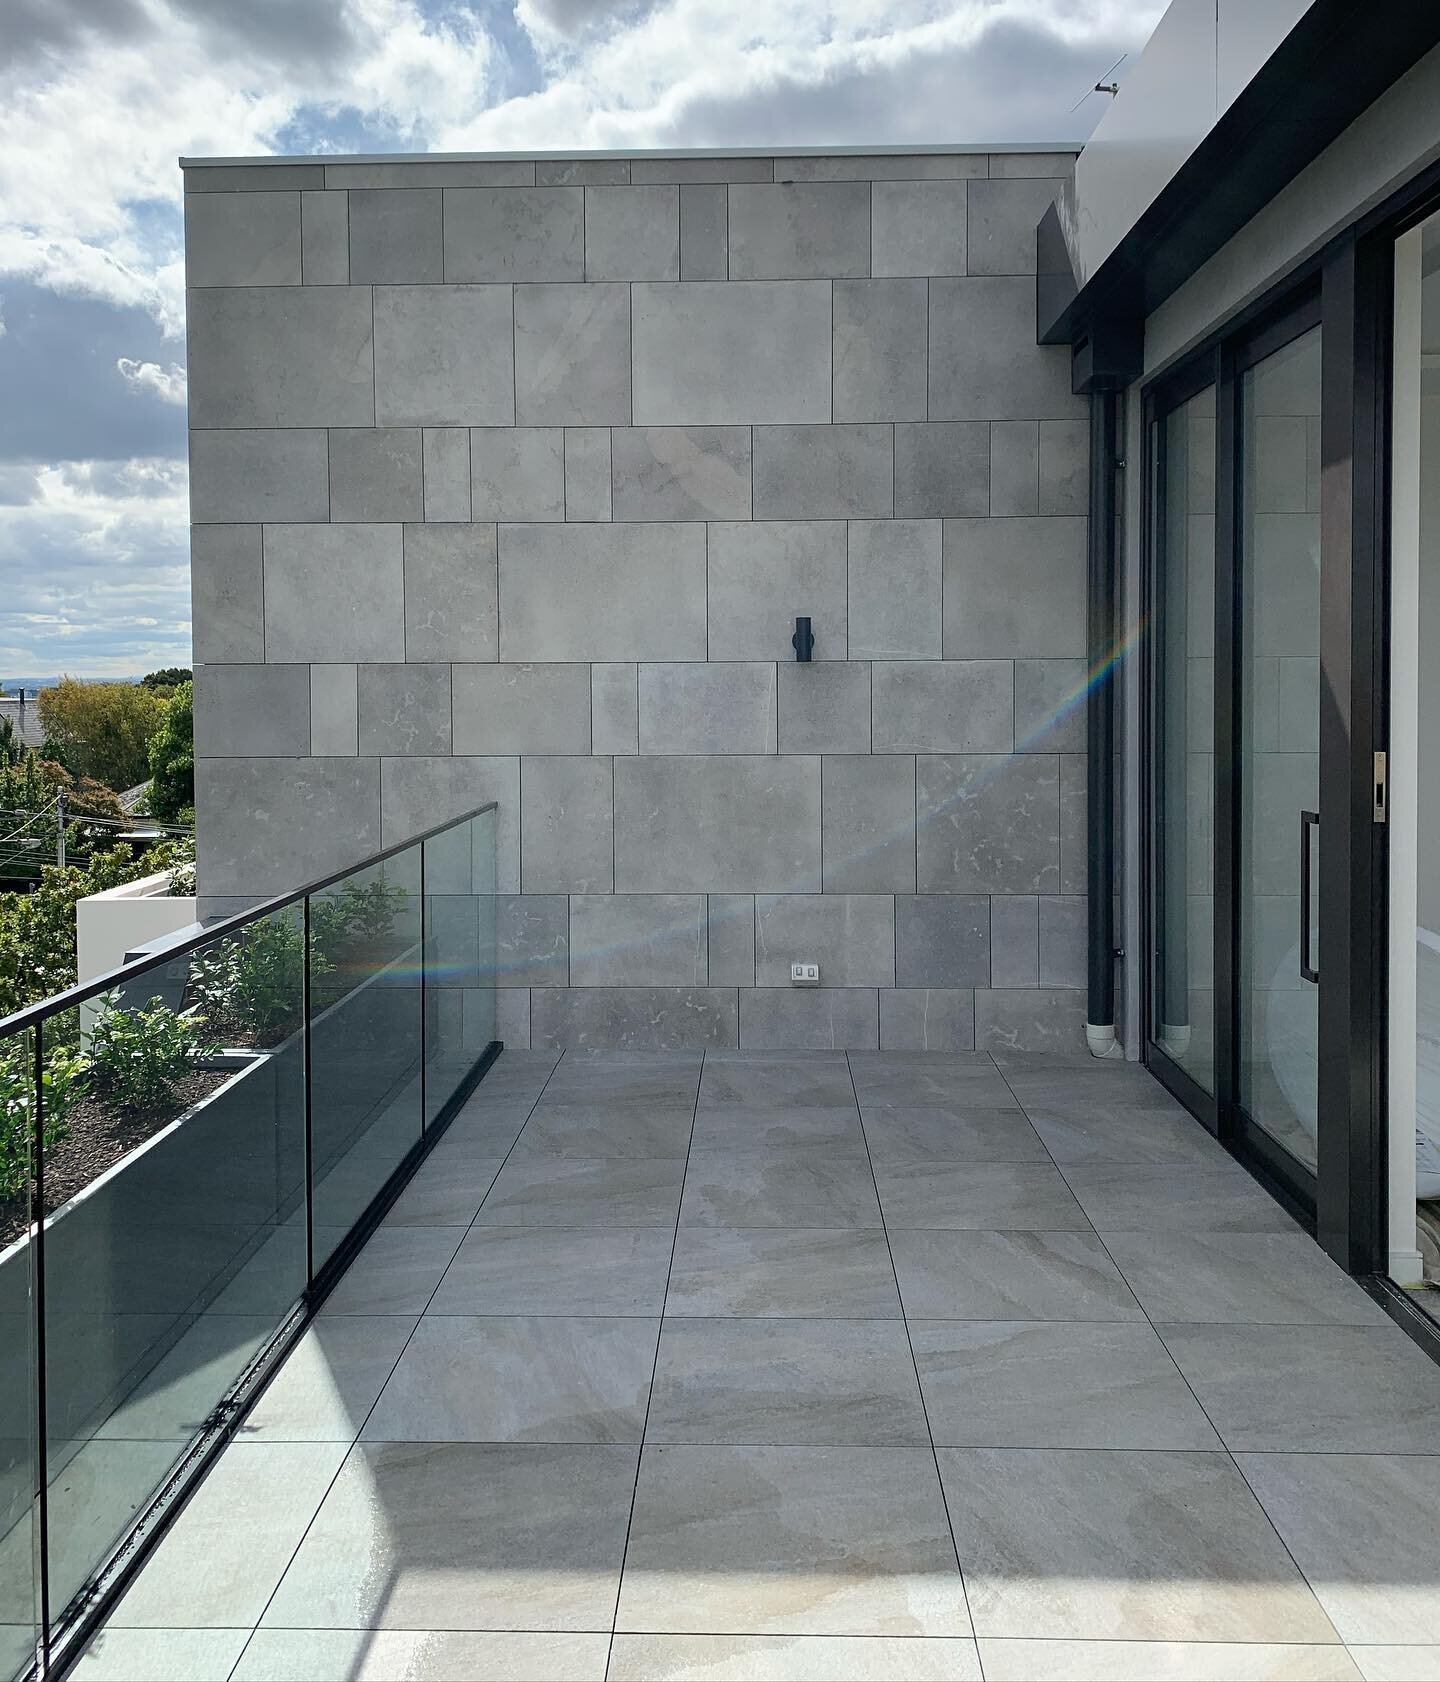 Malvern Rd Project ~ Penthouse balcony looks amazing with our mechanical fixed stone wall and pod and paving system.